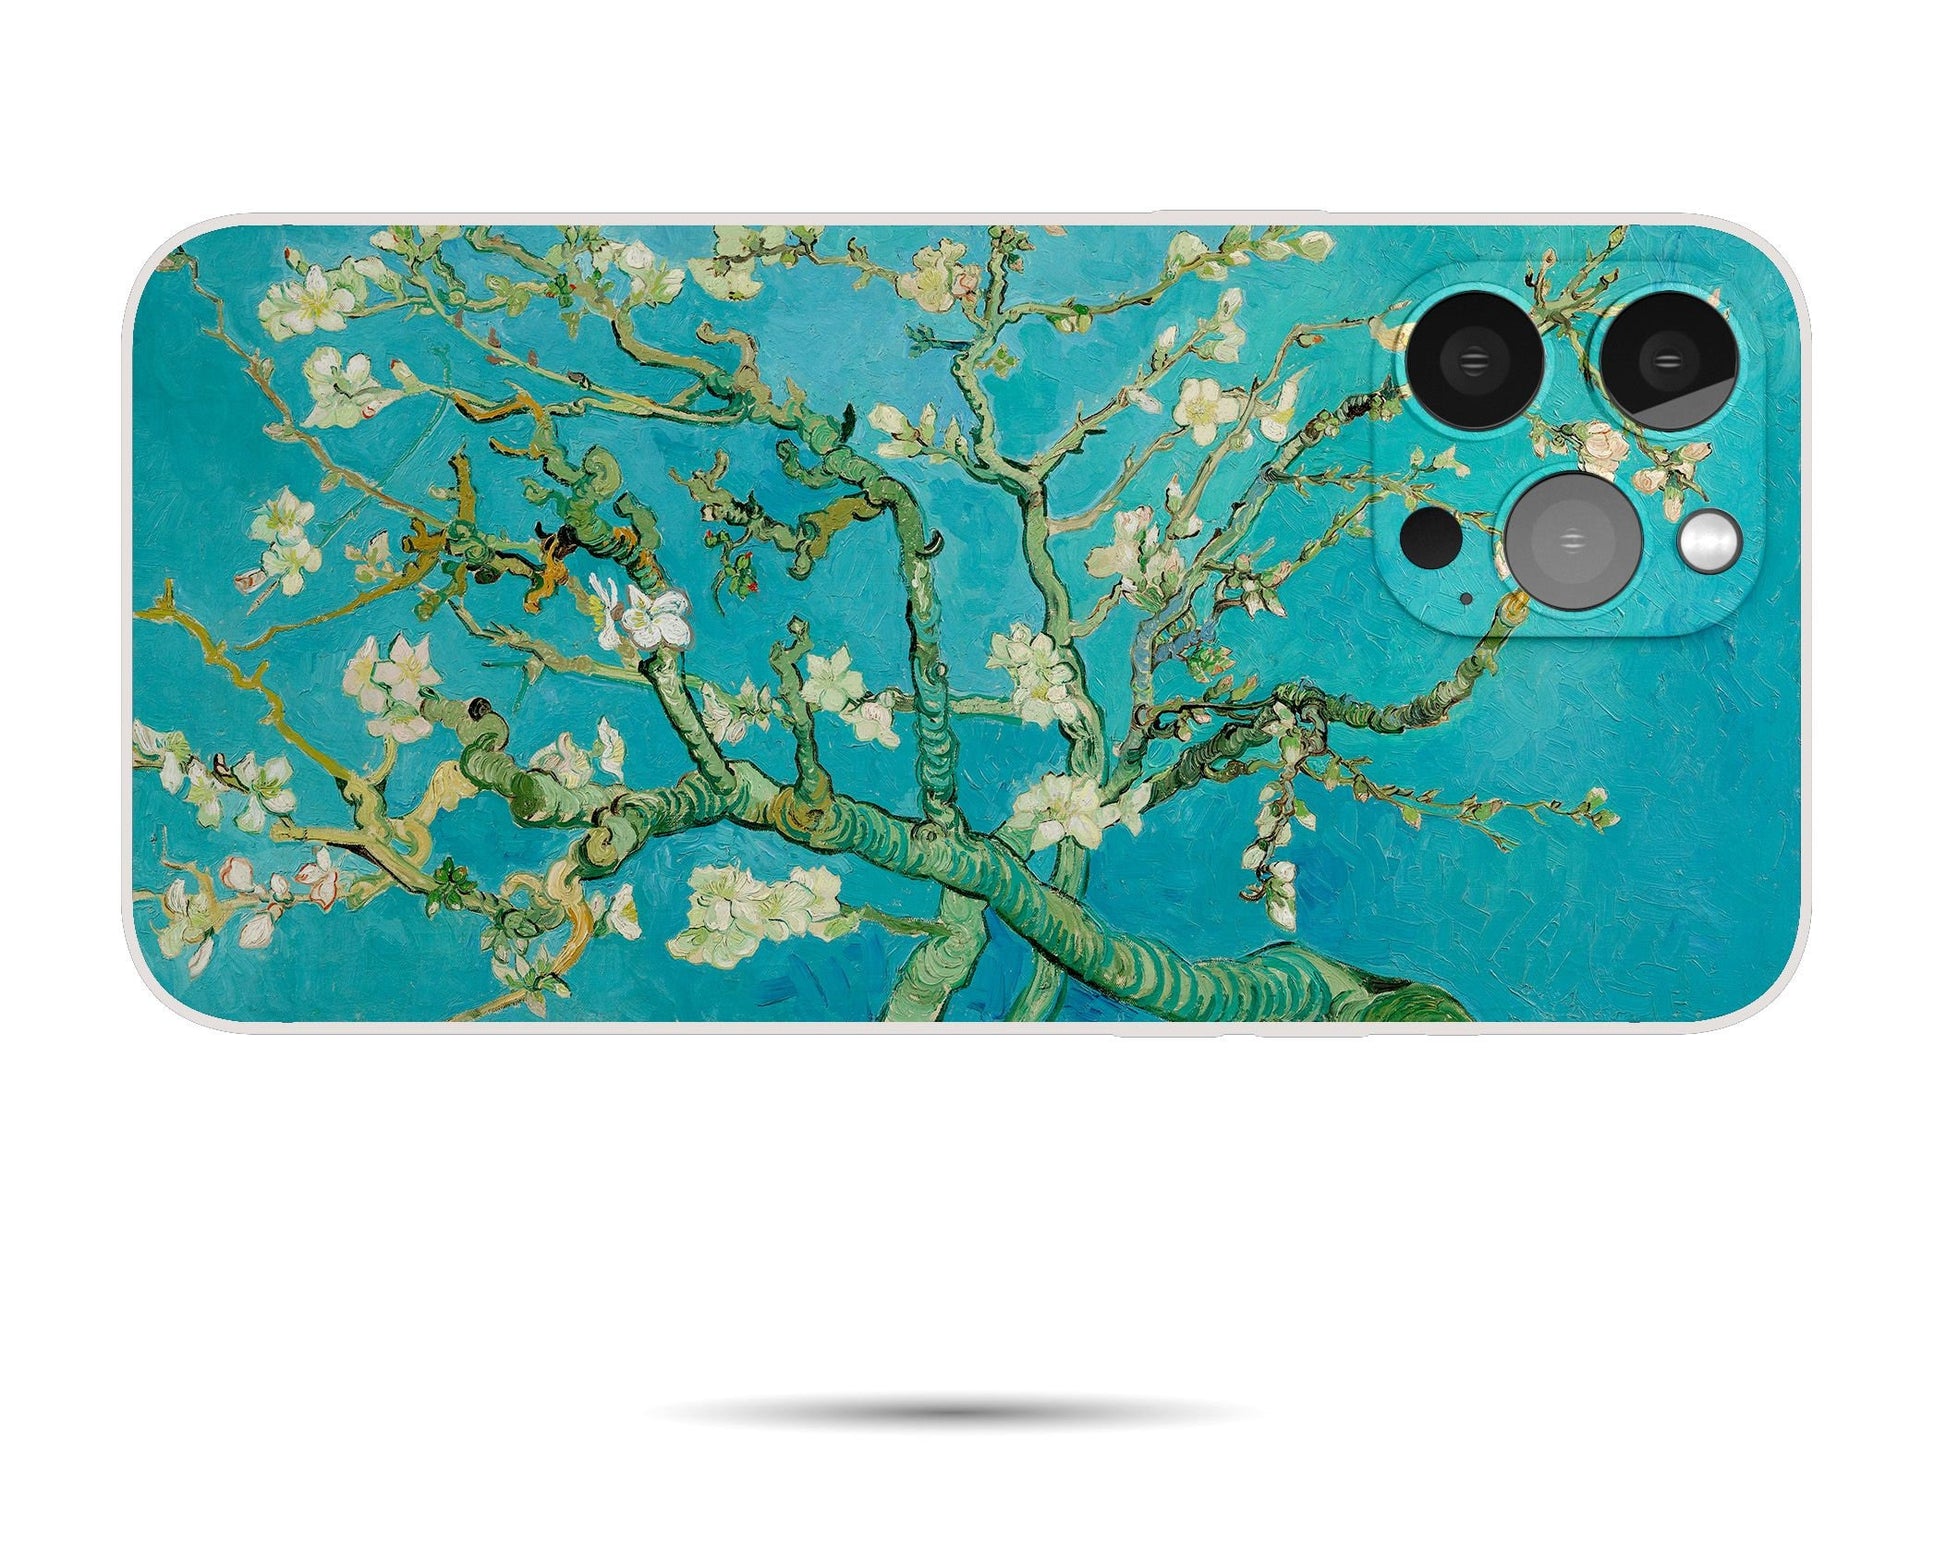 Vincent Van Gogh Almond Blossom Iphone Case, Iphone 13, Iphone X, Iphone 8 Plus Case, Vivid Colors, Birthday Gift, Silicone Case